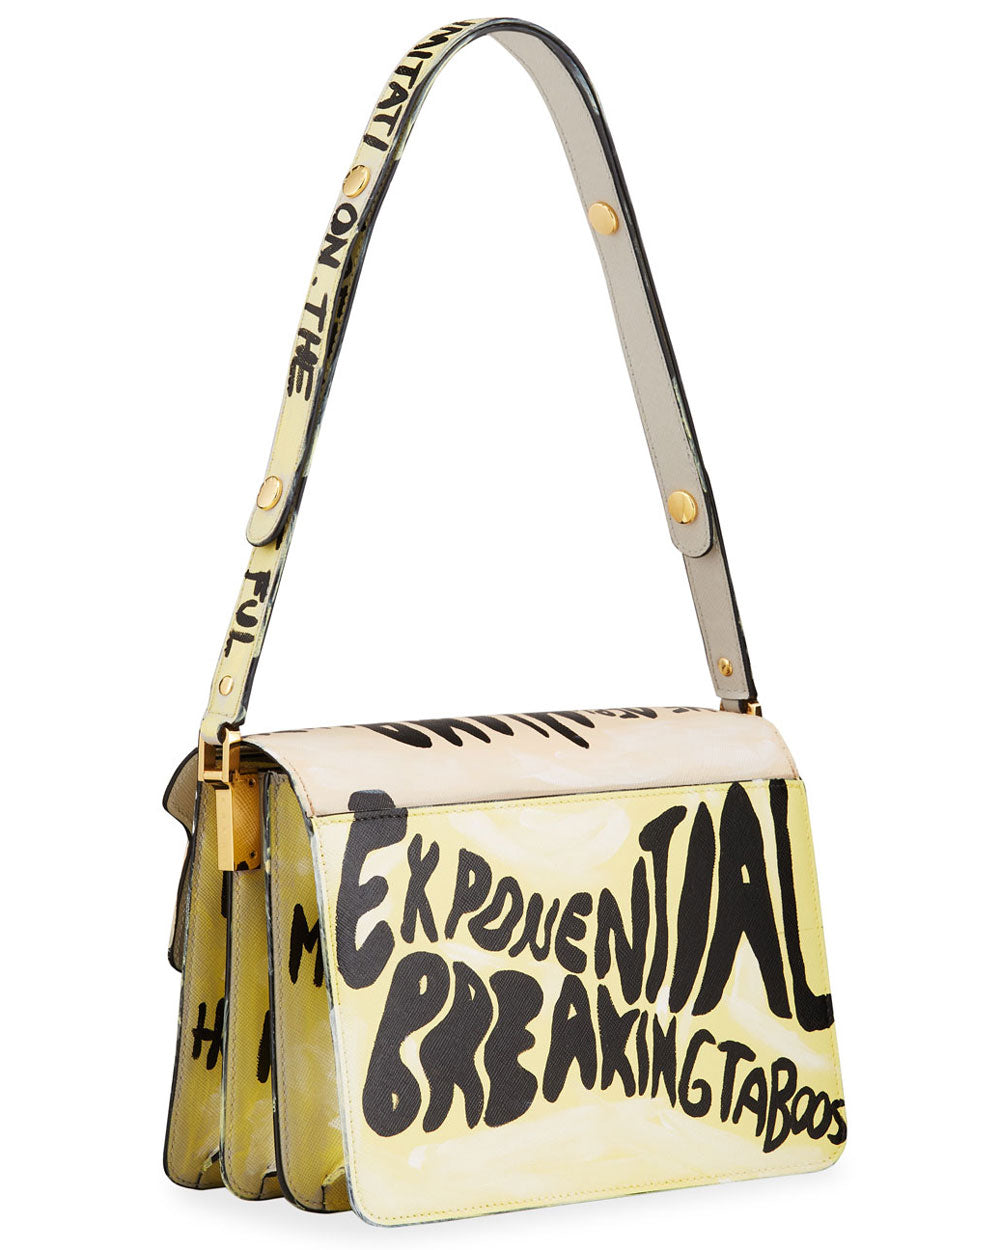 Thoughtfulness Painted Graphic Shoulder Bag